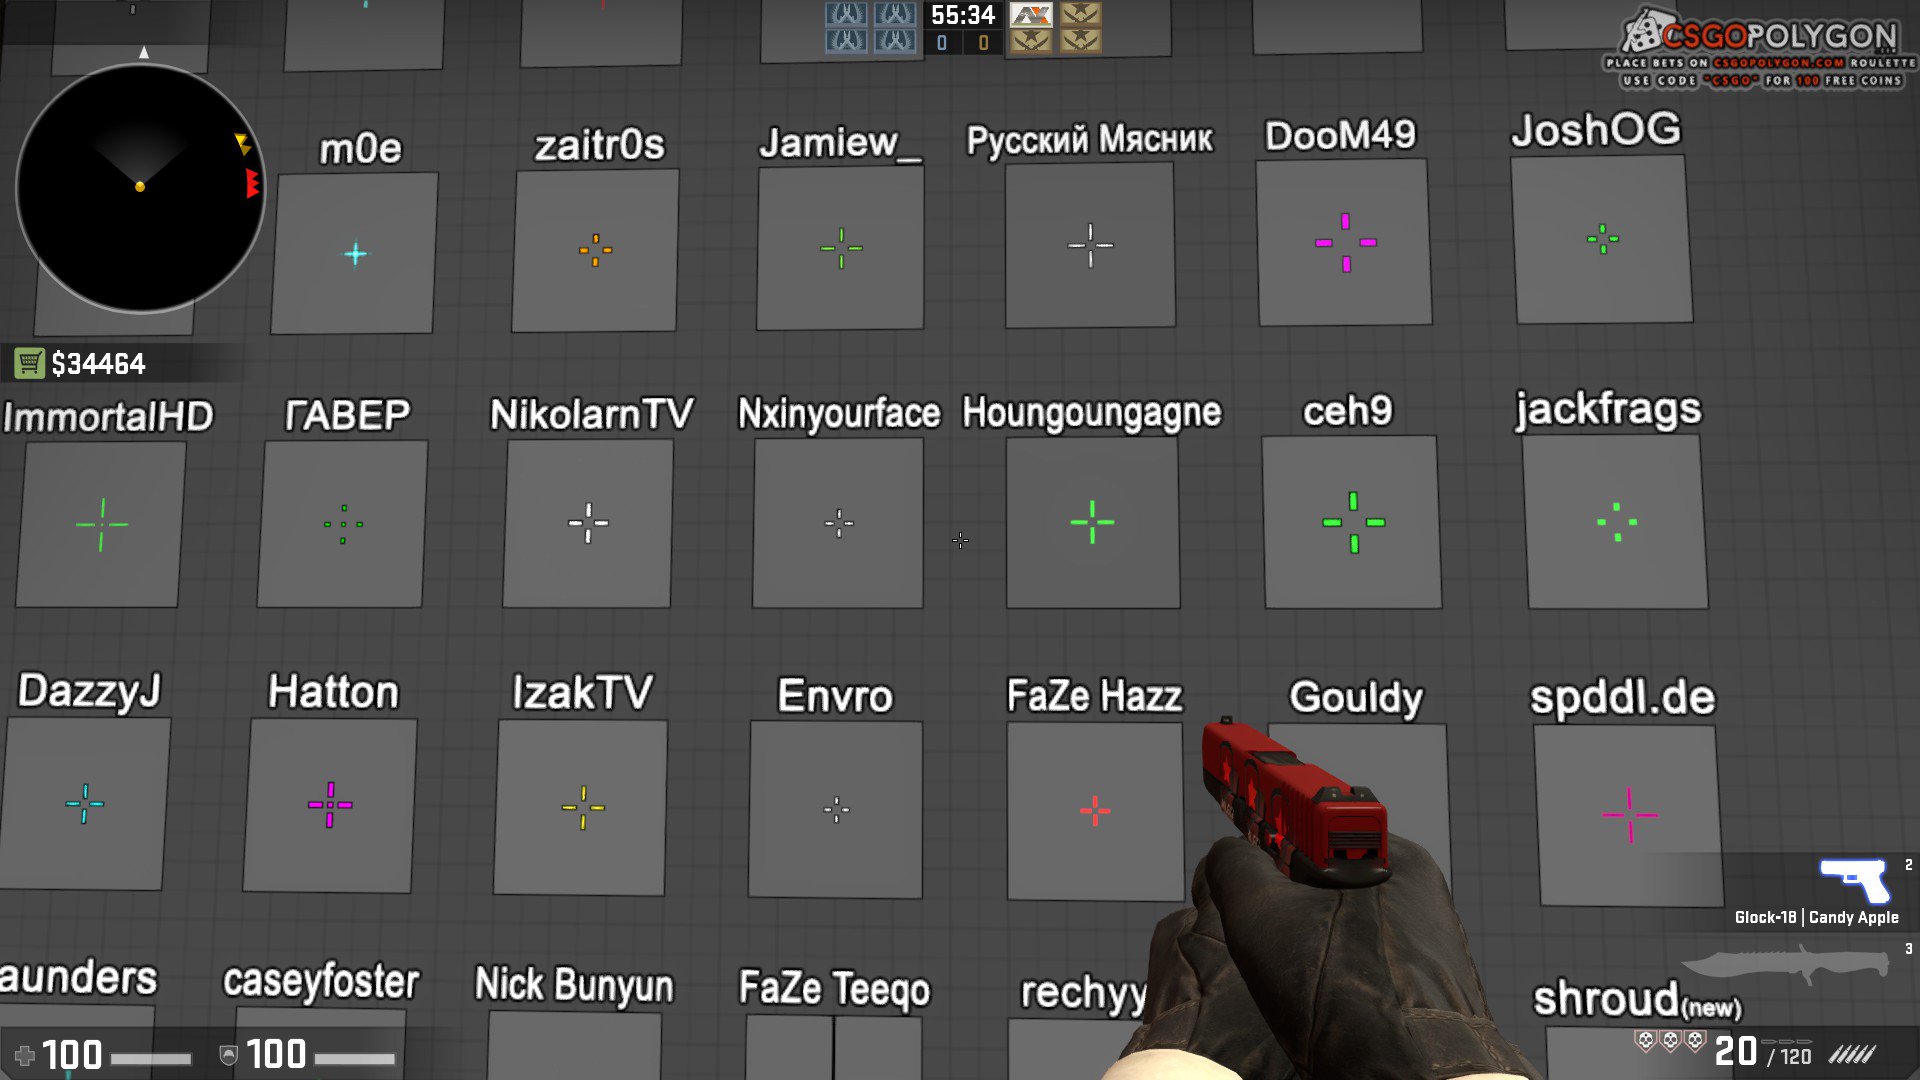 Hovanec on Twitter: "Thats so cute to have my crosshair next to on @crashz_cs Crosshair Generator, such a nice touch &lt;3 https://t.co/3QhGZiFElV" / Twitter